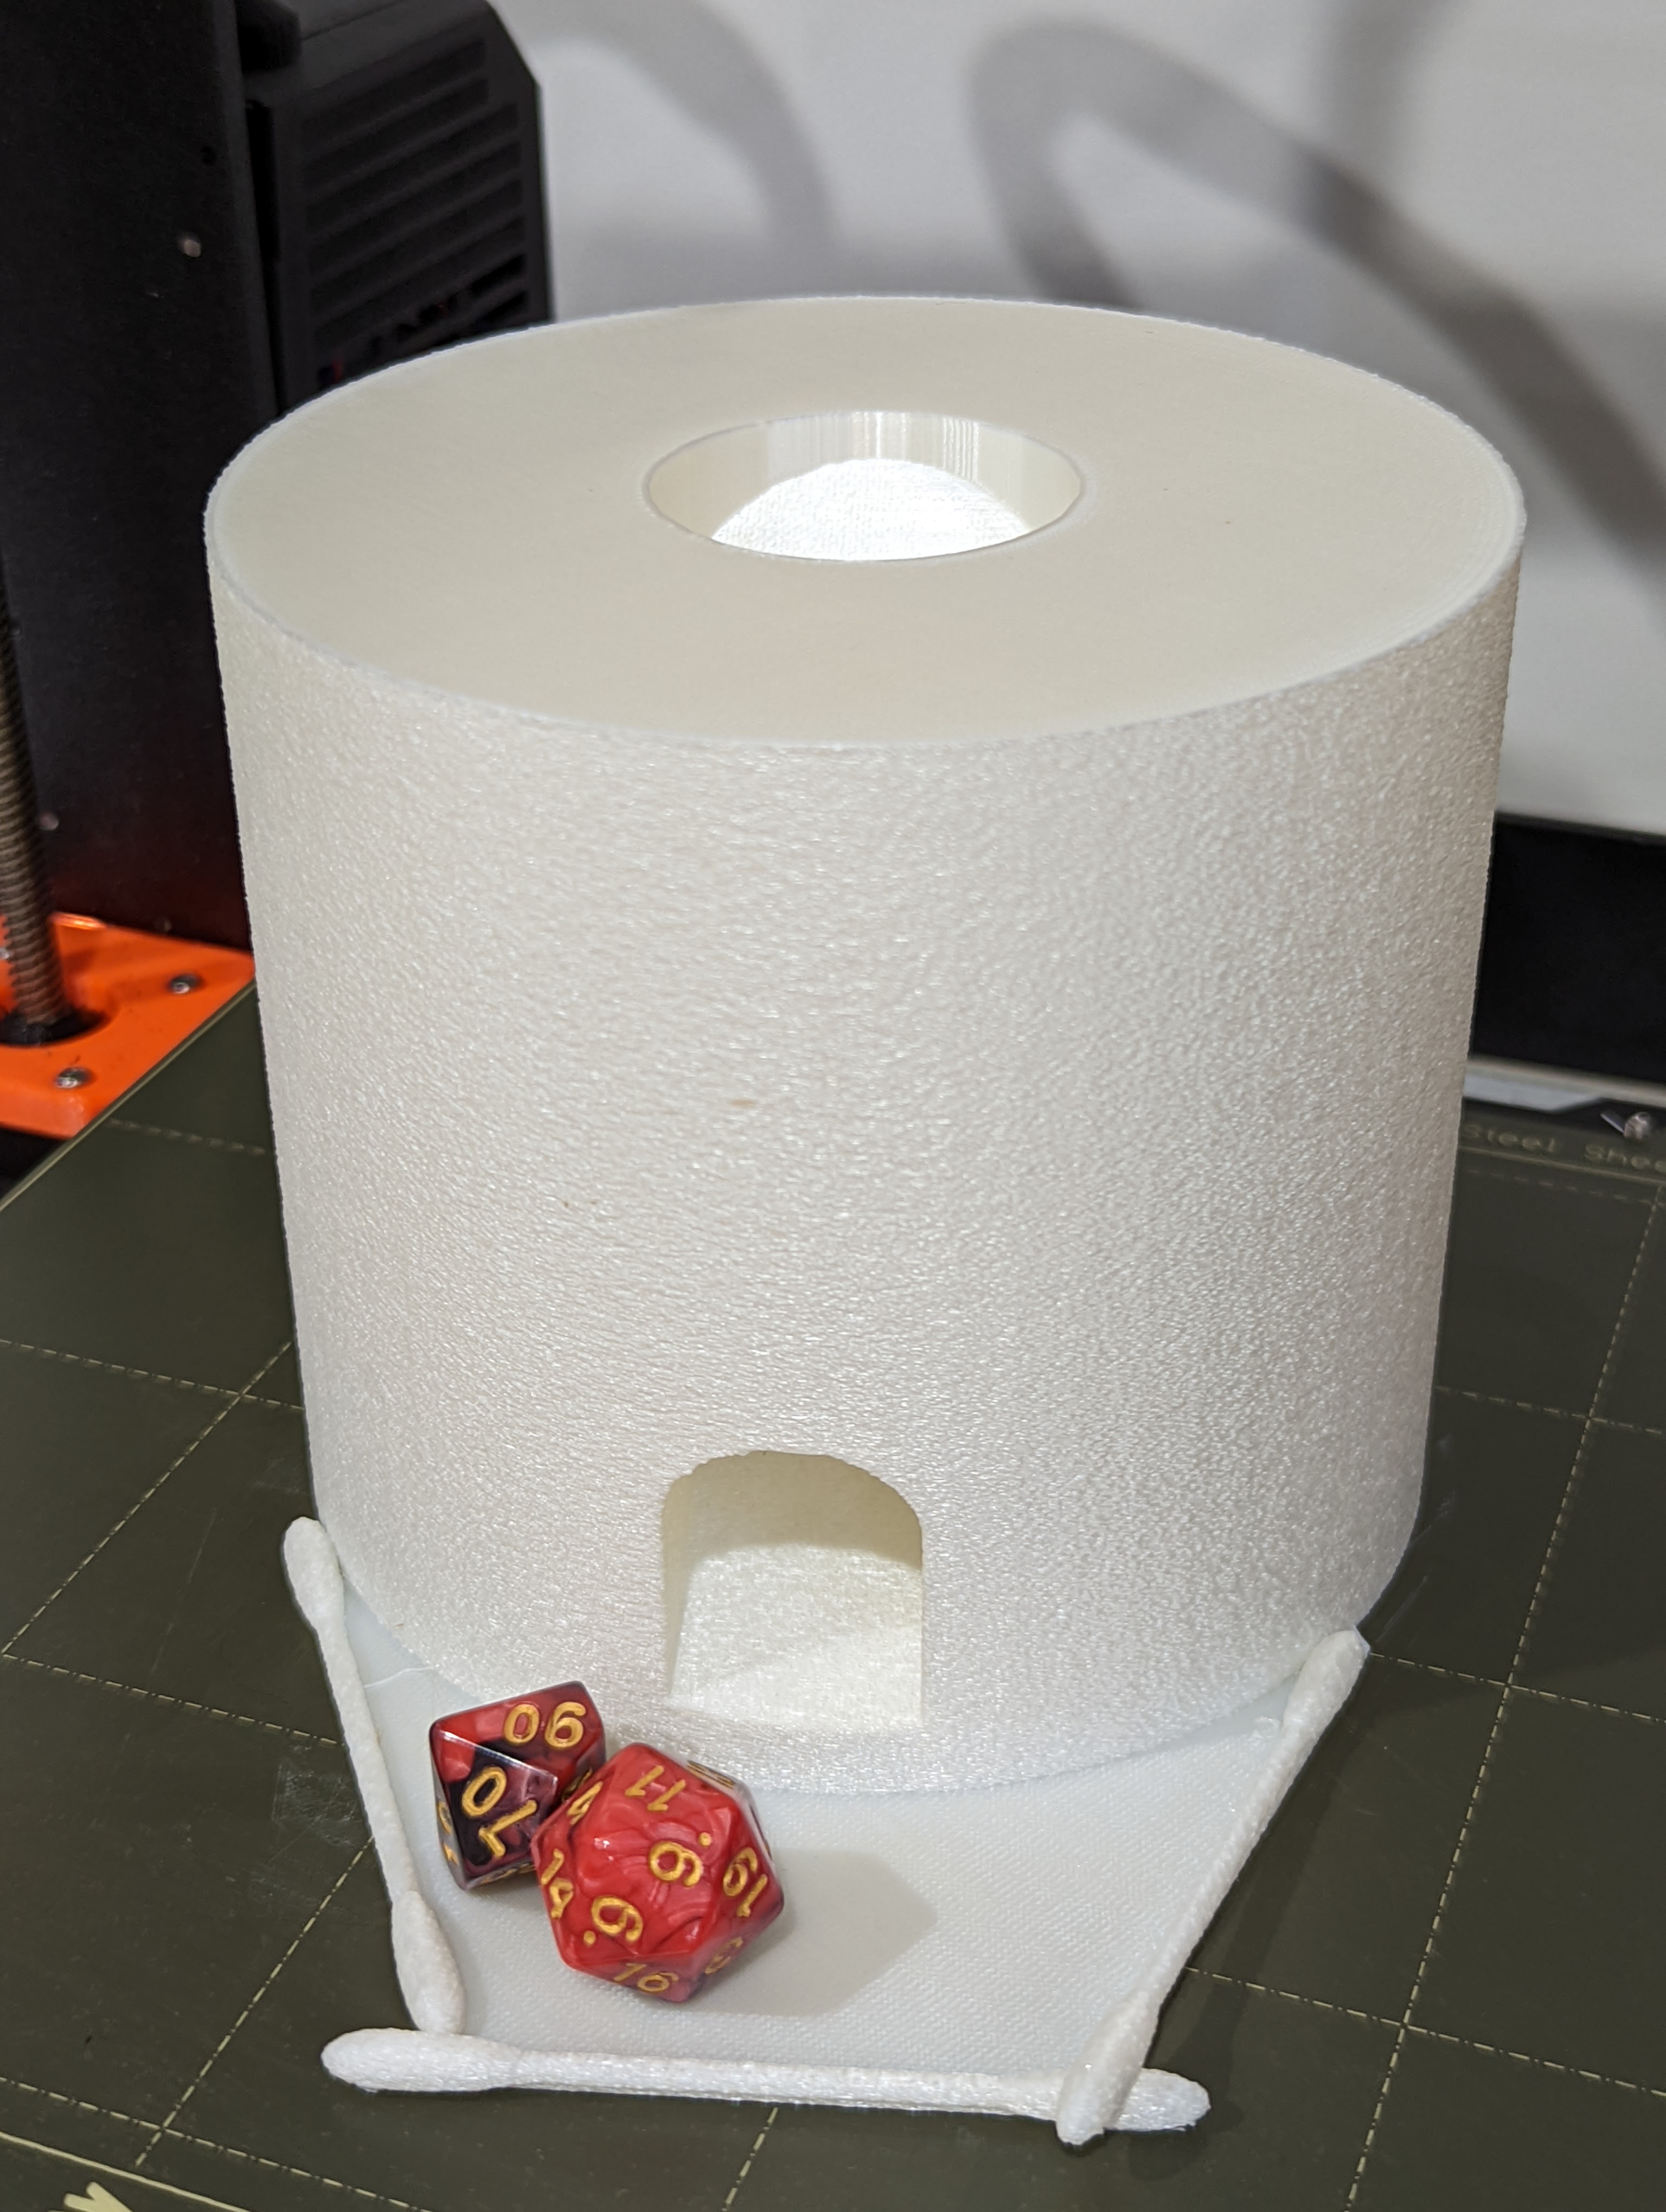 Toilet Paper Roll Dice Tower v1 and v2